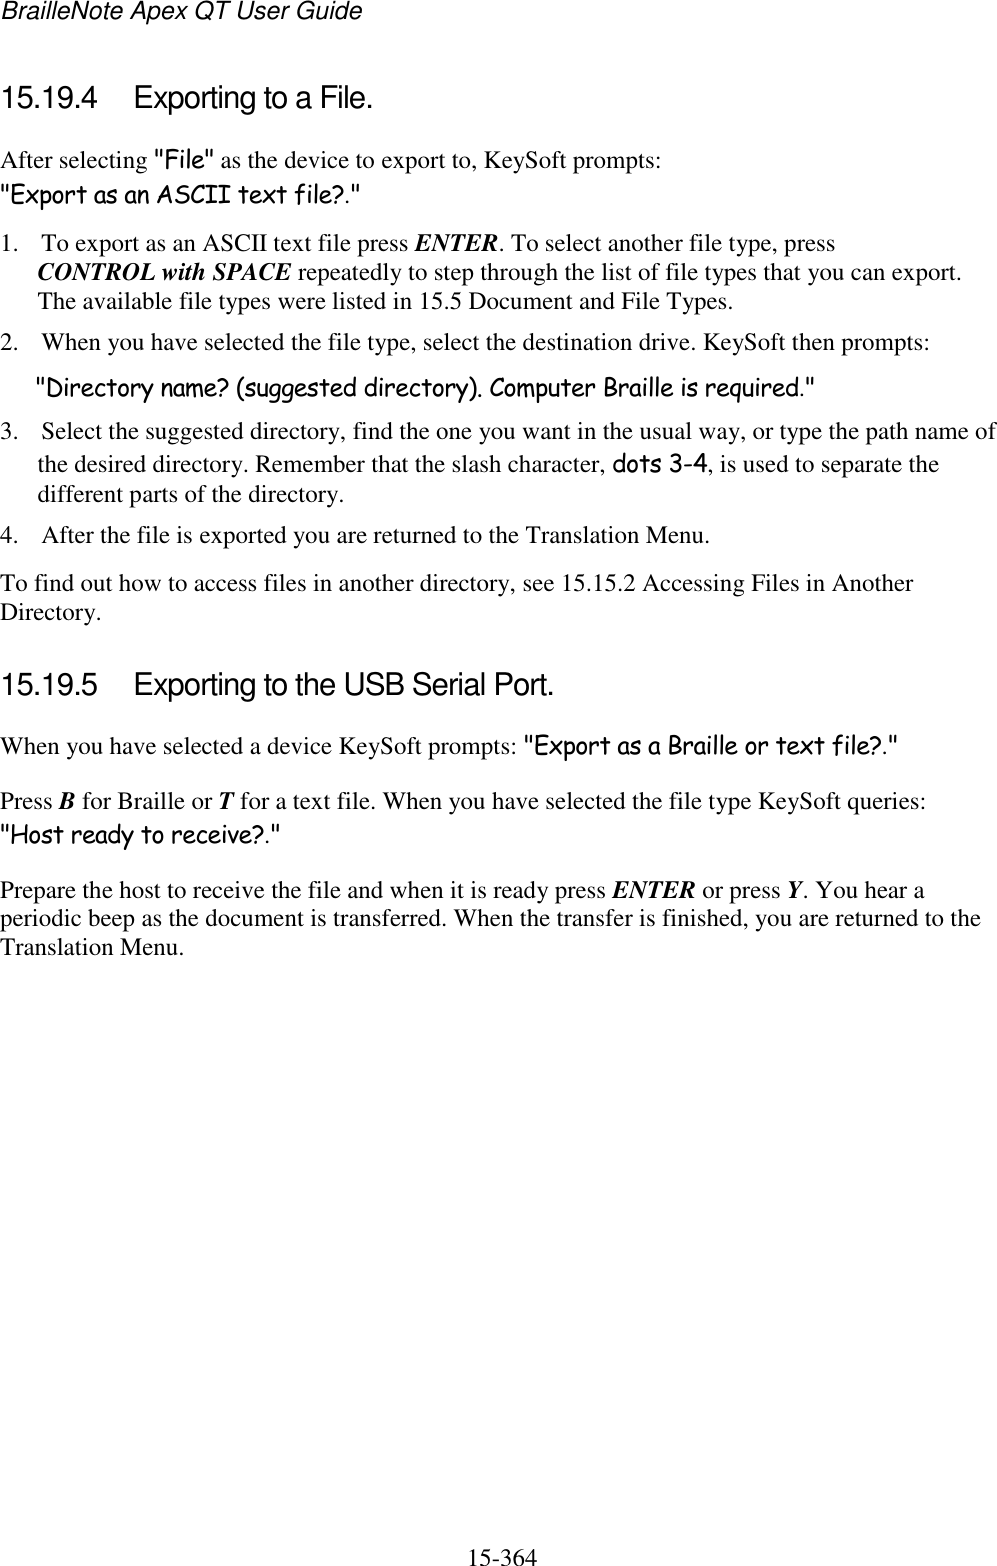 BrailleNote Apex QT User Guide  15-364   15.19.4  Exporting to a File. After selecting &quot;File&quot; as the device to export to, KeySoft prompts: &quot;Export as an ASCII text file?.&quot; 1. To export as an ASCII text file press ENTER. To select another file type, press CONTROL with SPACE repeatedly to step through the list of file types that you can export. The available file types were listed in 15.5 Document and File Types. 2. When you have selected the file type, select the destination drive. KeySoft then prompts: &quot;Directory name? (suggested directory). Computer Braille is required.&quot; 3. Select the suggested directory, find the one you want in the usual way, or type the path name of the desired directory. Remember that the slash character, dots 3-4, is used to separate the different parts of the directory. 4. After the file is exported you are returned to the Translation Menu. To find out how to access files in another directory, see 15.15.2 Accessing Files in Another Directory.  15.19.5  Exporting to the USB Serial Port. When you have selected a device KeySoft prompts: &quot;Export as a Braille or text file?.&quot; Press B for Braille or T for a text file. When you have selected the file type KeySoft queries: &quot;Host ready to receive?.&quot; Prepare the host to receive the file and when it is ready press ENTER or press Y. You hear a periodic beep as the document is transferred. When the transfer is finished, you are returned to the Translation Menu.   